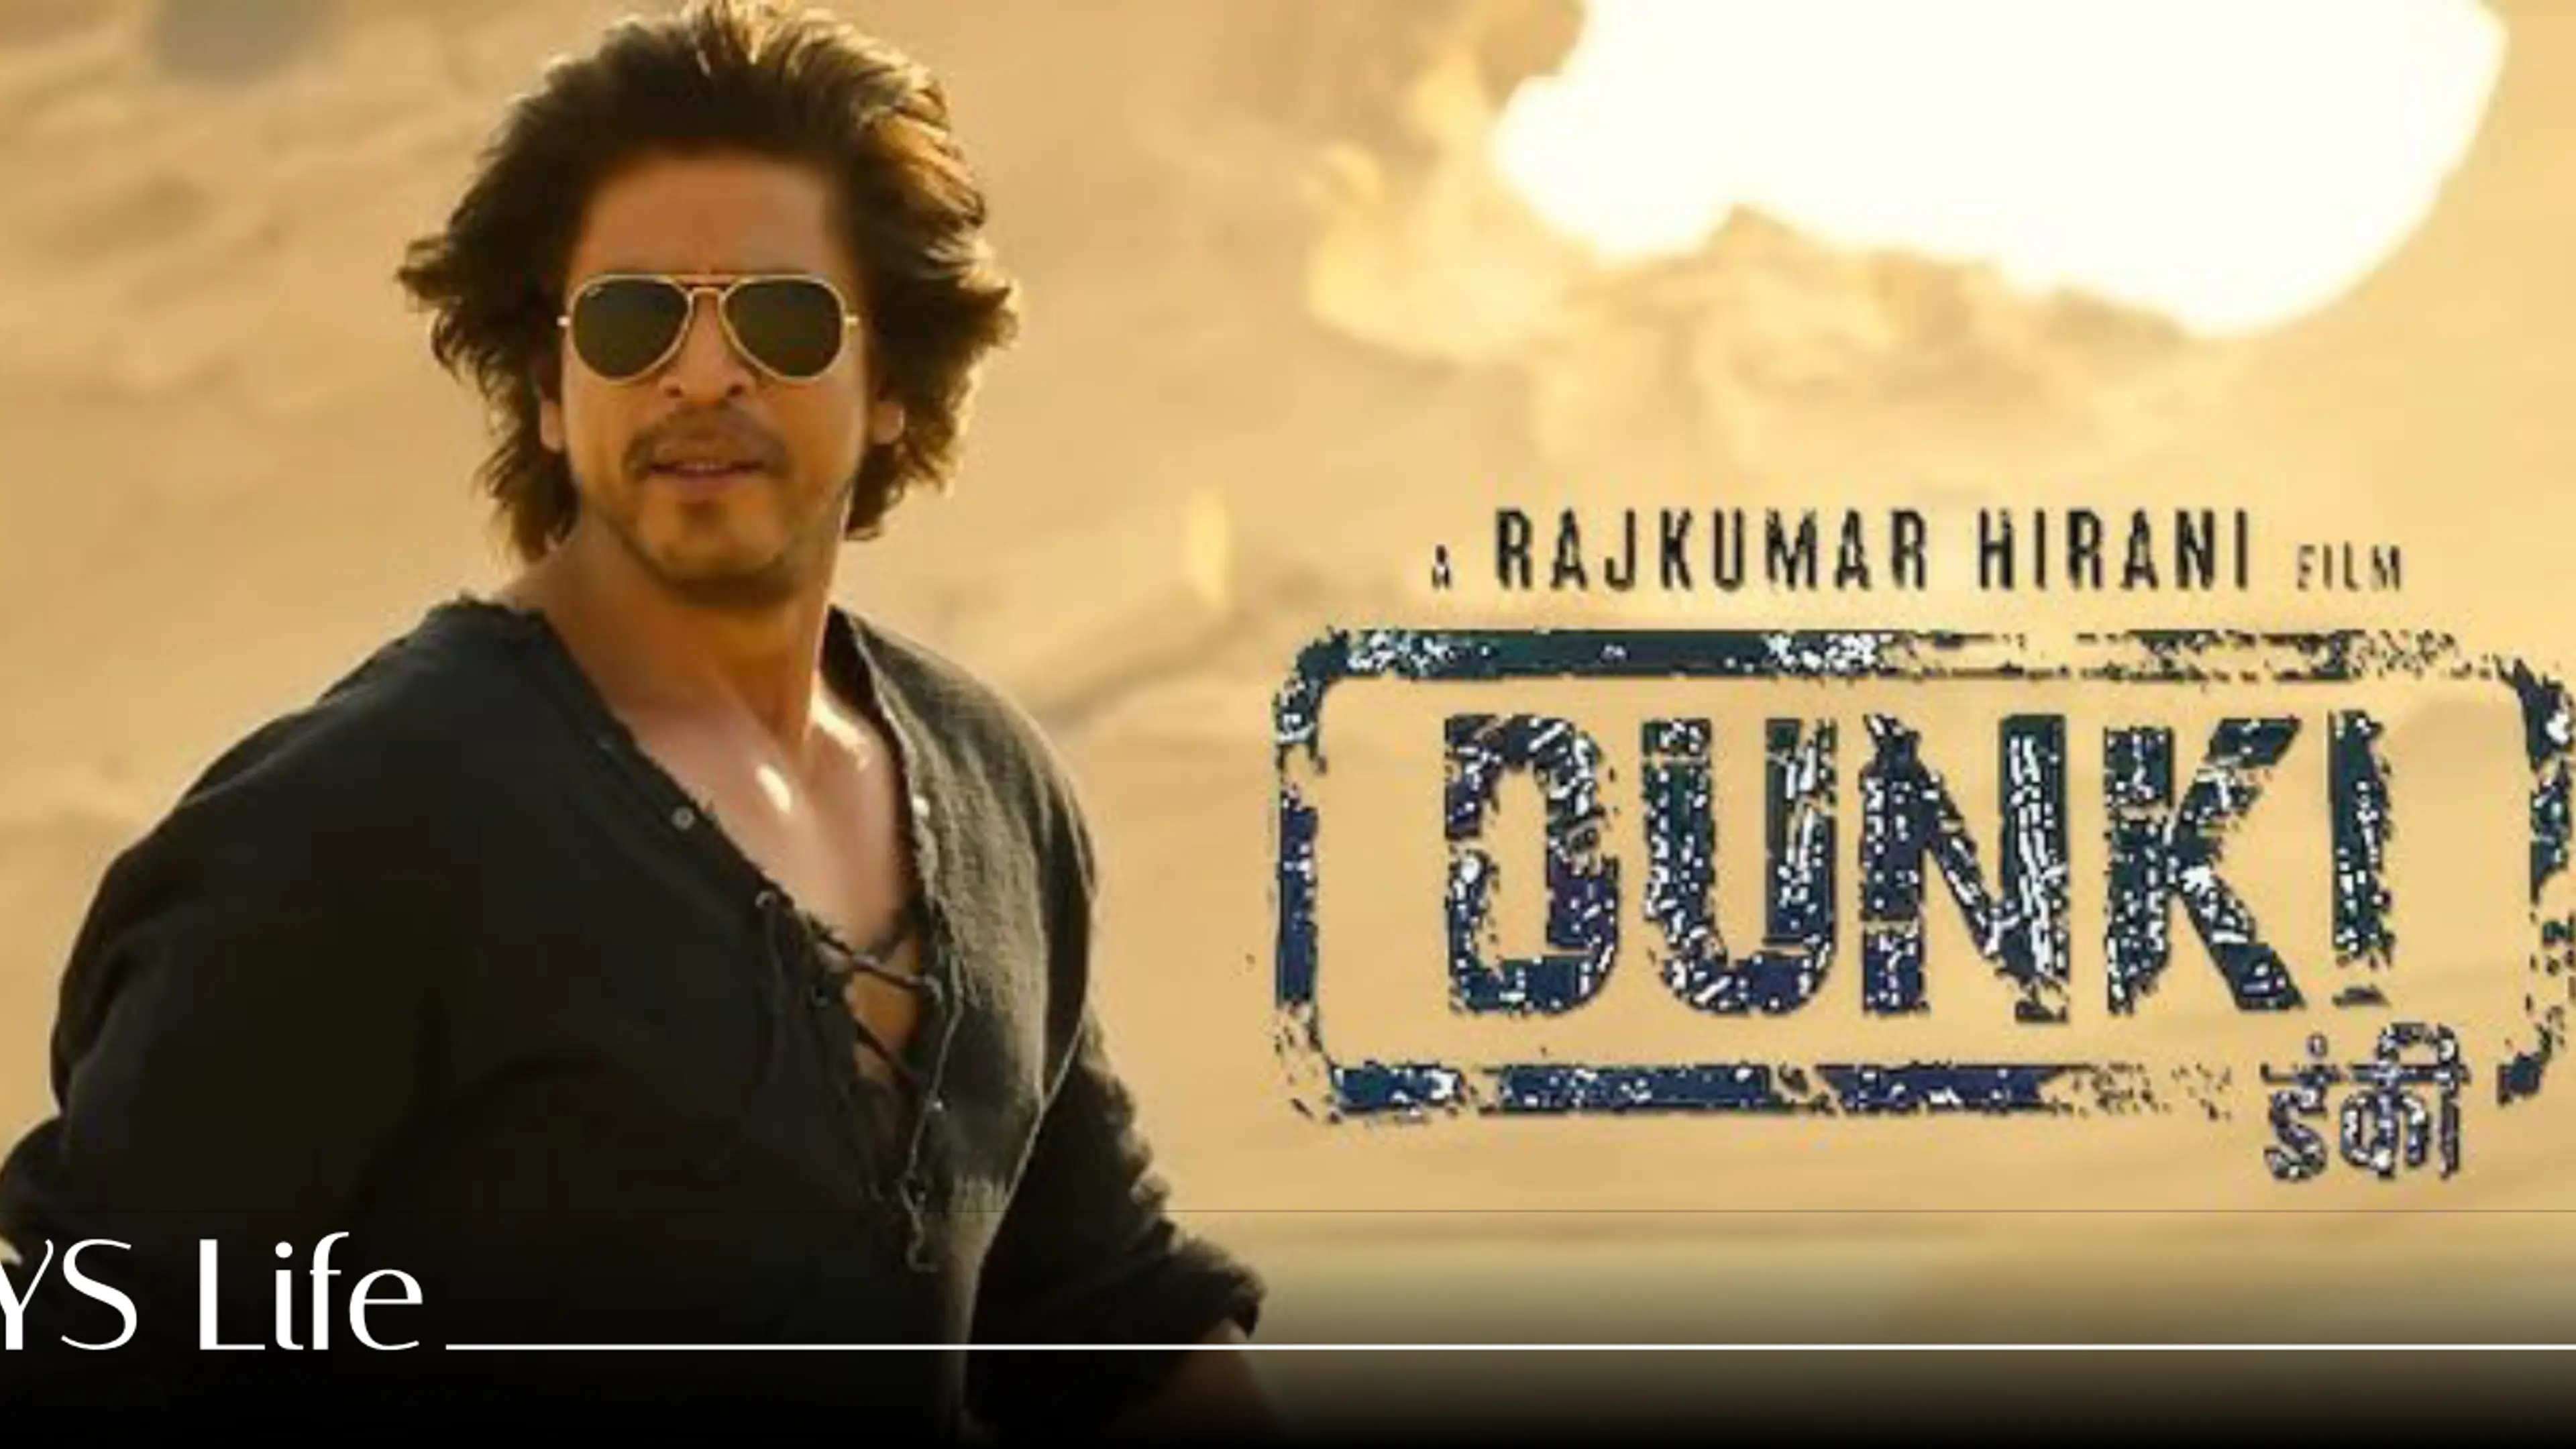 Dunki is an imperfect but moving tale of illegal immigrants with an SRK romance at its heart 